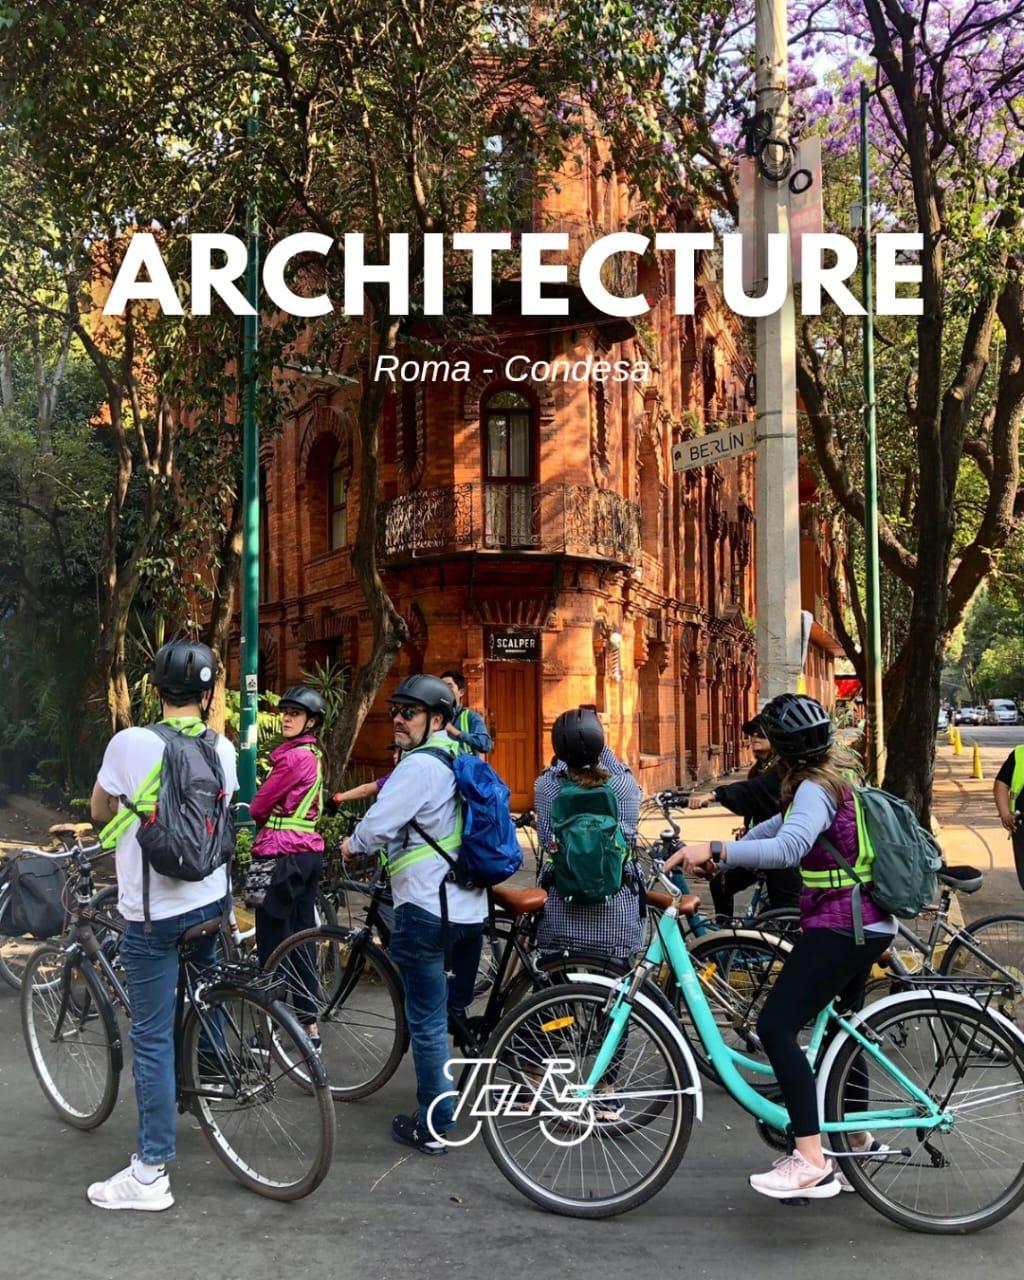 Image of Architectural Bike Tour in Mexico City